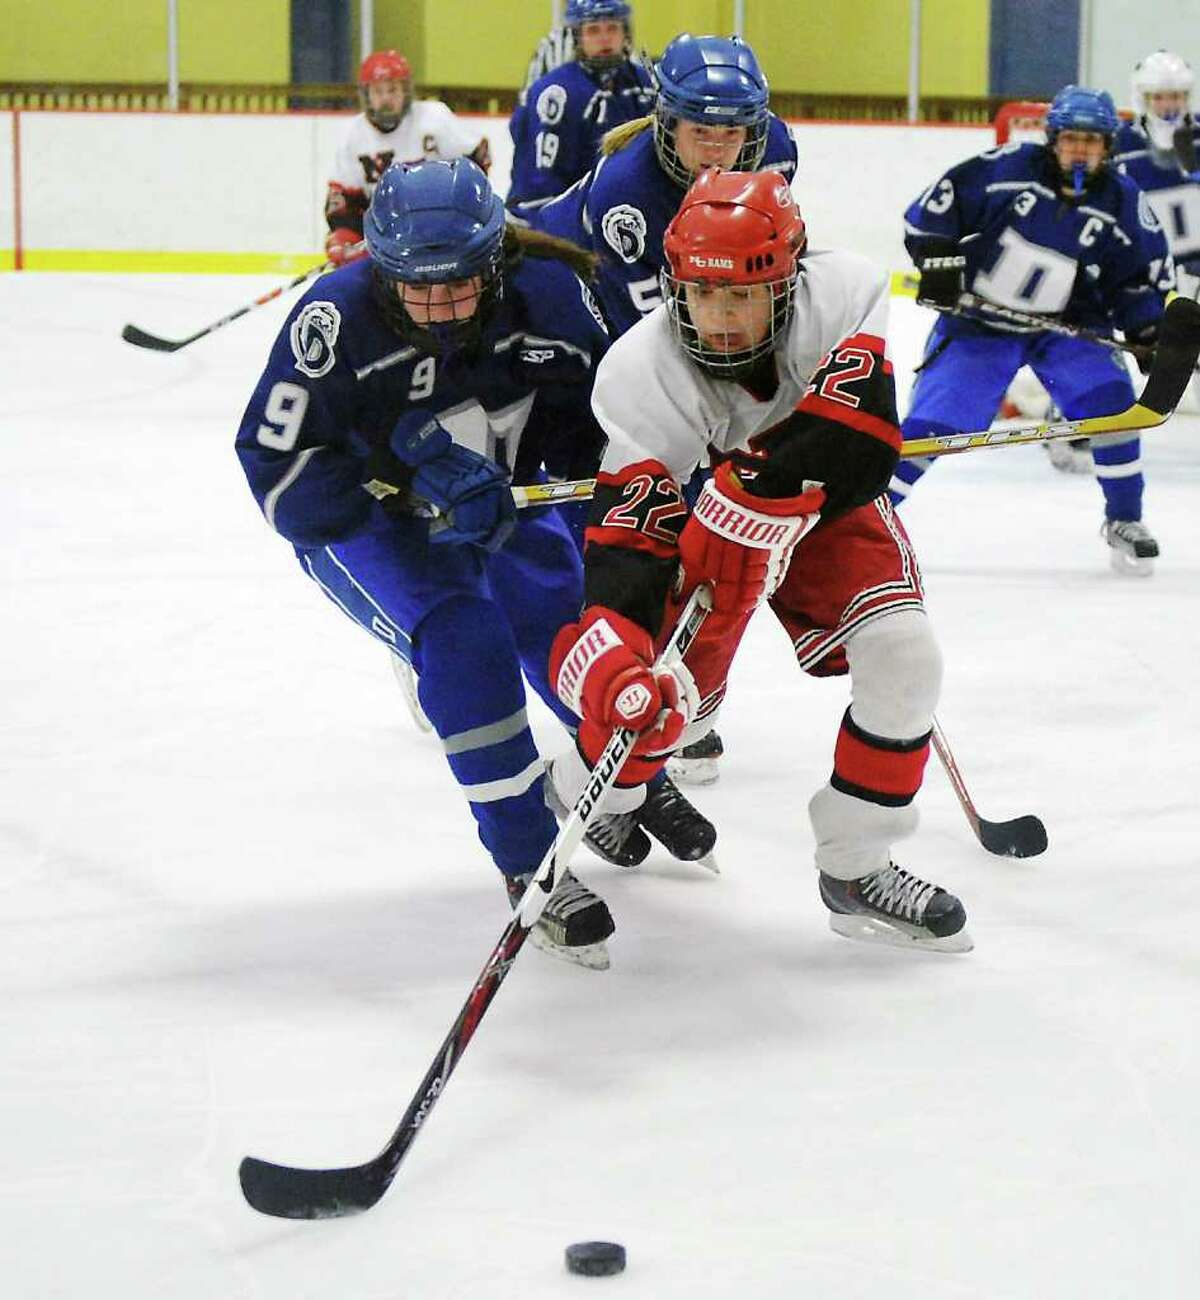 New Canaan High School's Olivia Hompe reaches for the puck with pressure from Darien High School's Sara Shaker in the girls hockey FCIAC championship game at Terry Conners Rink in Stamford, Conn. on Saturday February 26, 2011. New Canaan won 7-1.